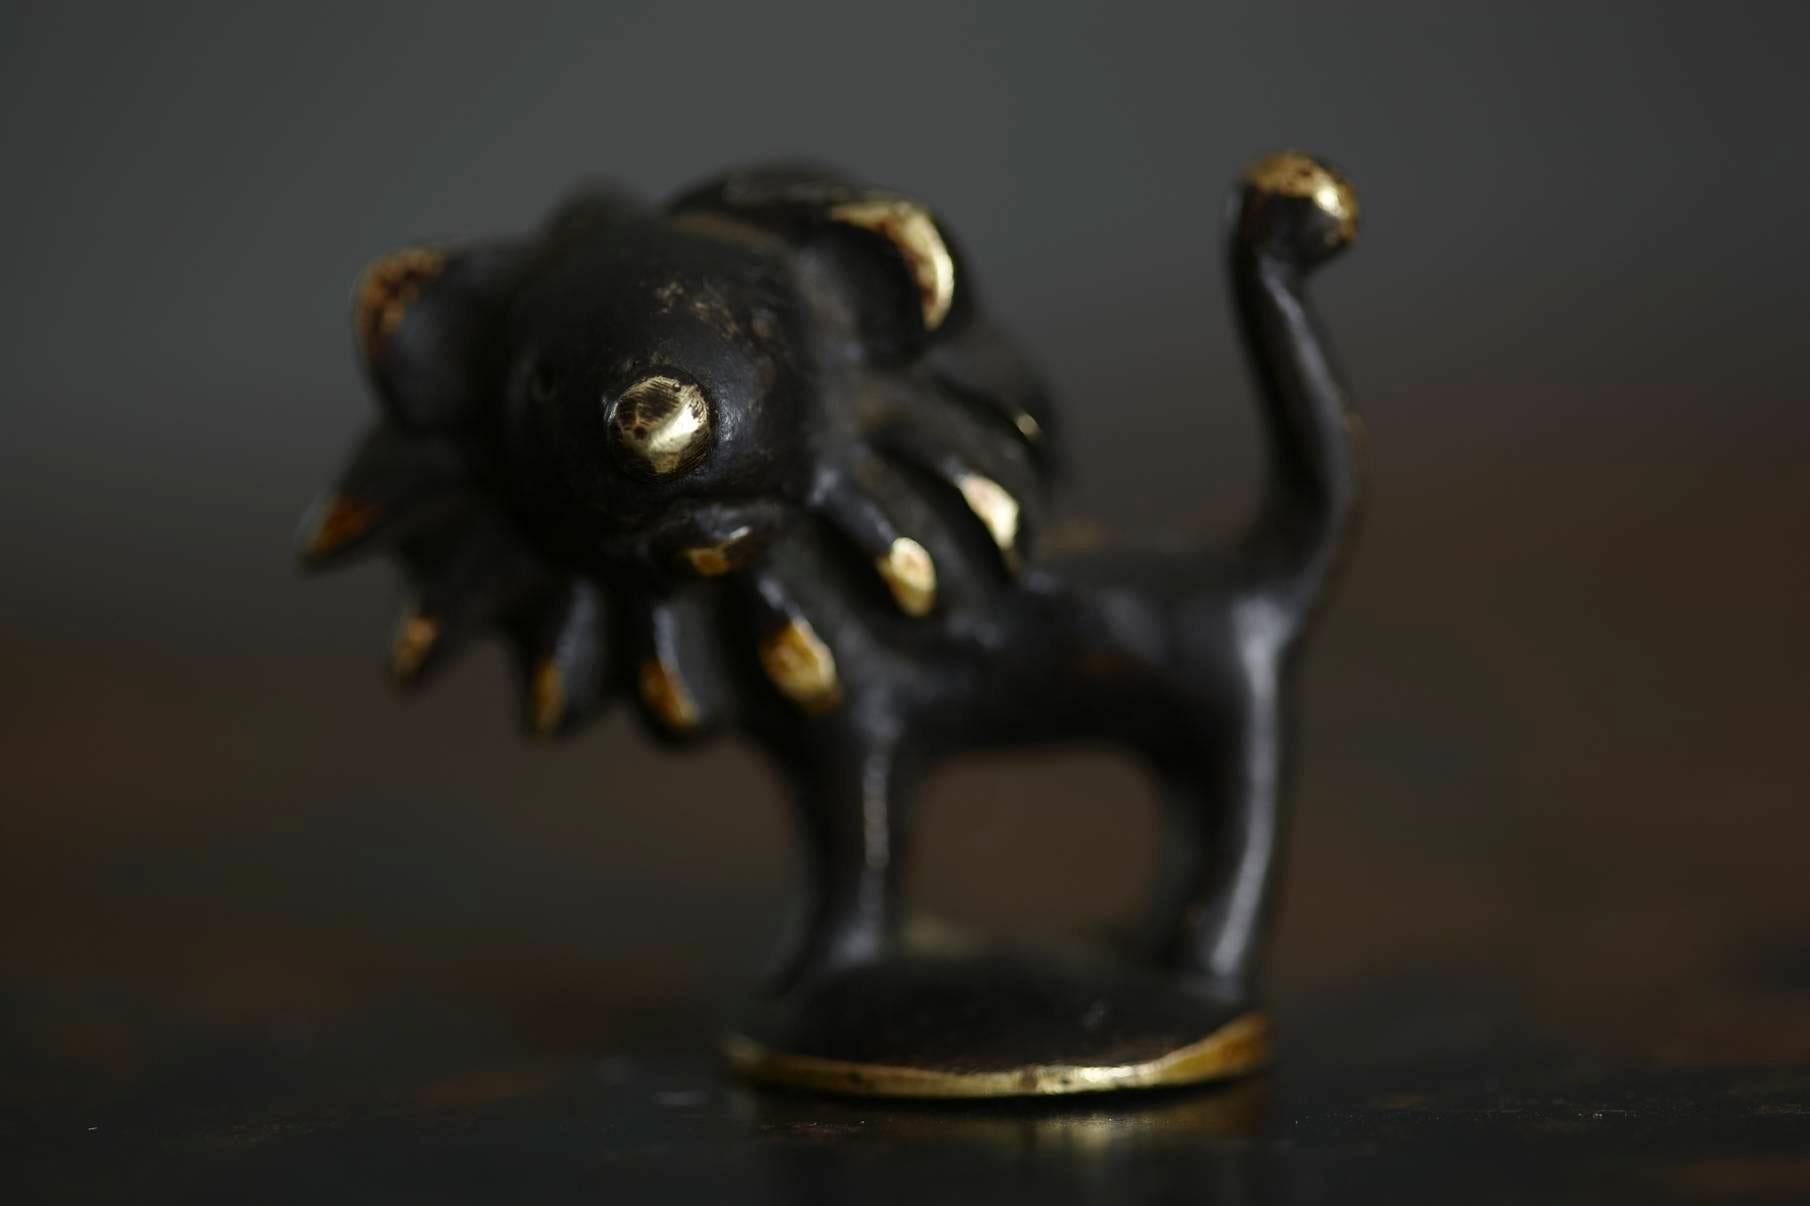 A very charming little brass lion figurine. Another one of Walter Bosses' humorous animal designs in brass.
Manufactured by Hertha Baller in Austria in the 1950s. The figurine is in excellent condition.
In the 1950s Bosse developed an innovative